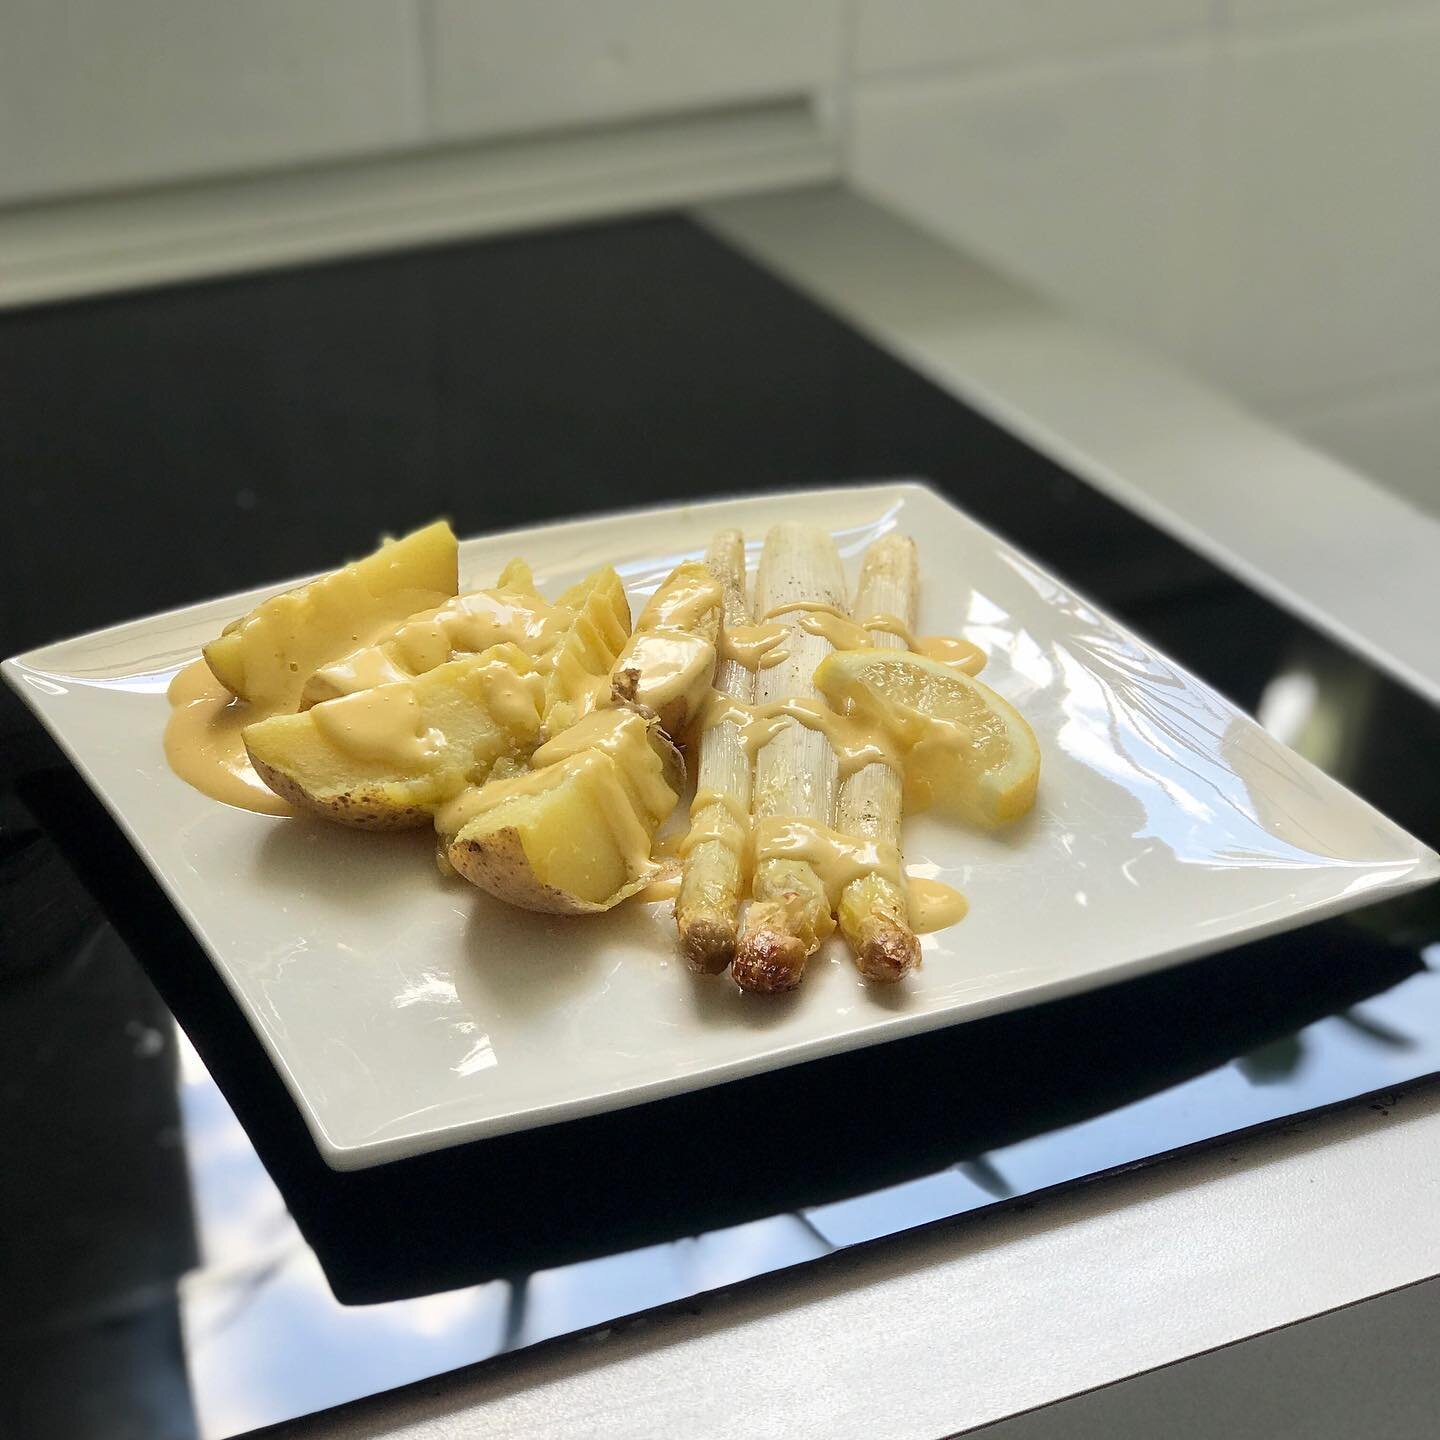 🇩🇪 #stayhome and visit Germany through this white asparagus from @alicevwonderland: &ldquo;Germans LOVE white asparagus. We wait for the season all year and when it&rsquo;s finally here we eat as much Spargel as possible.&nbsp;(Yes everyone&rsquo;s